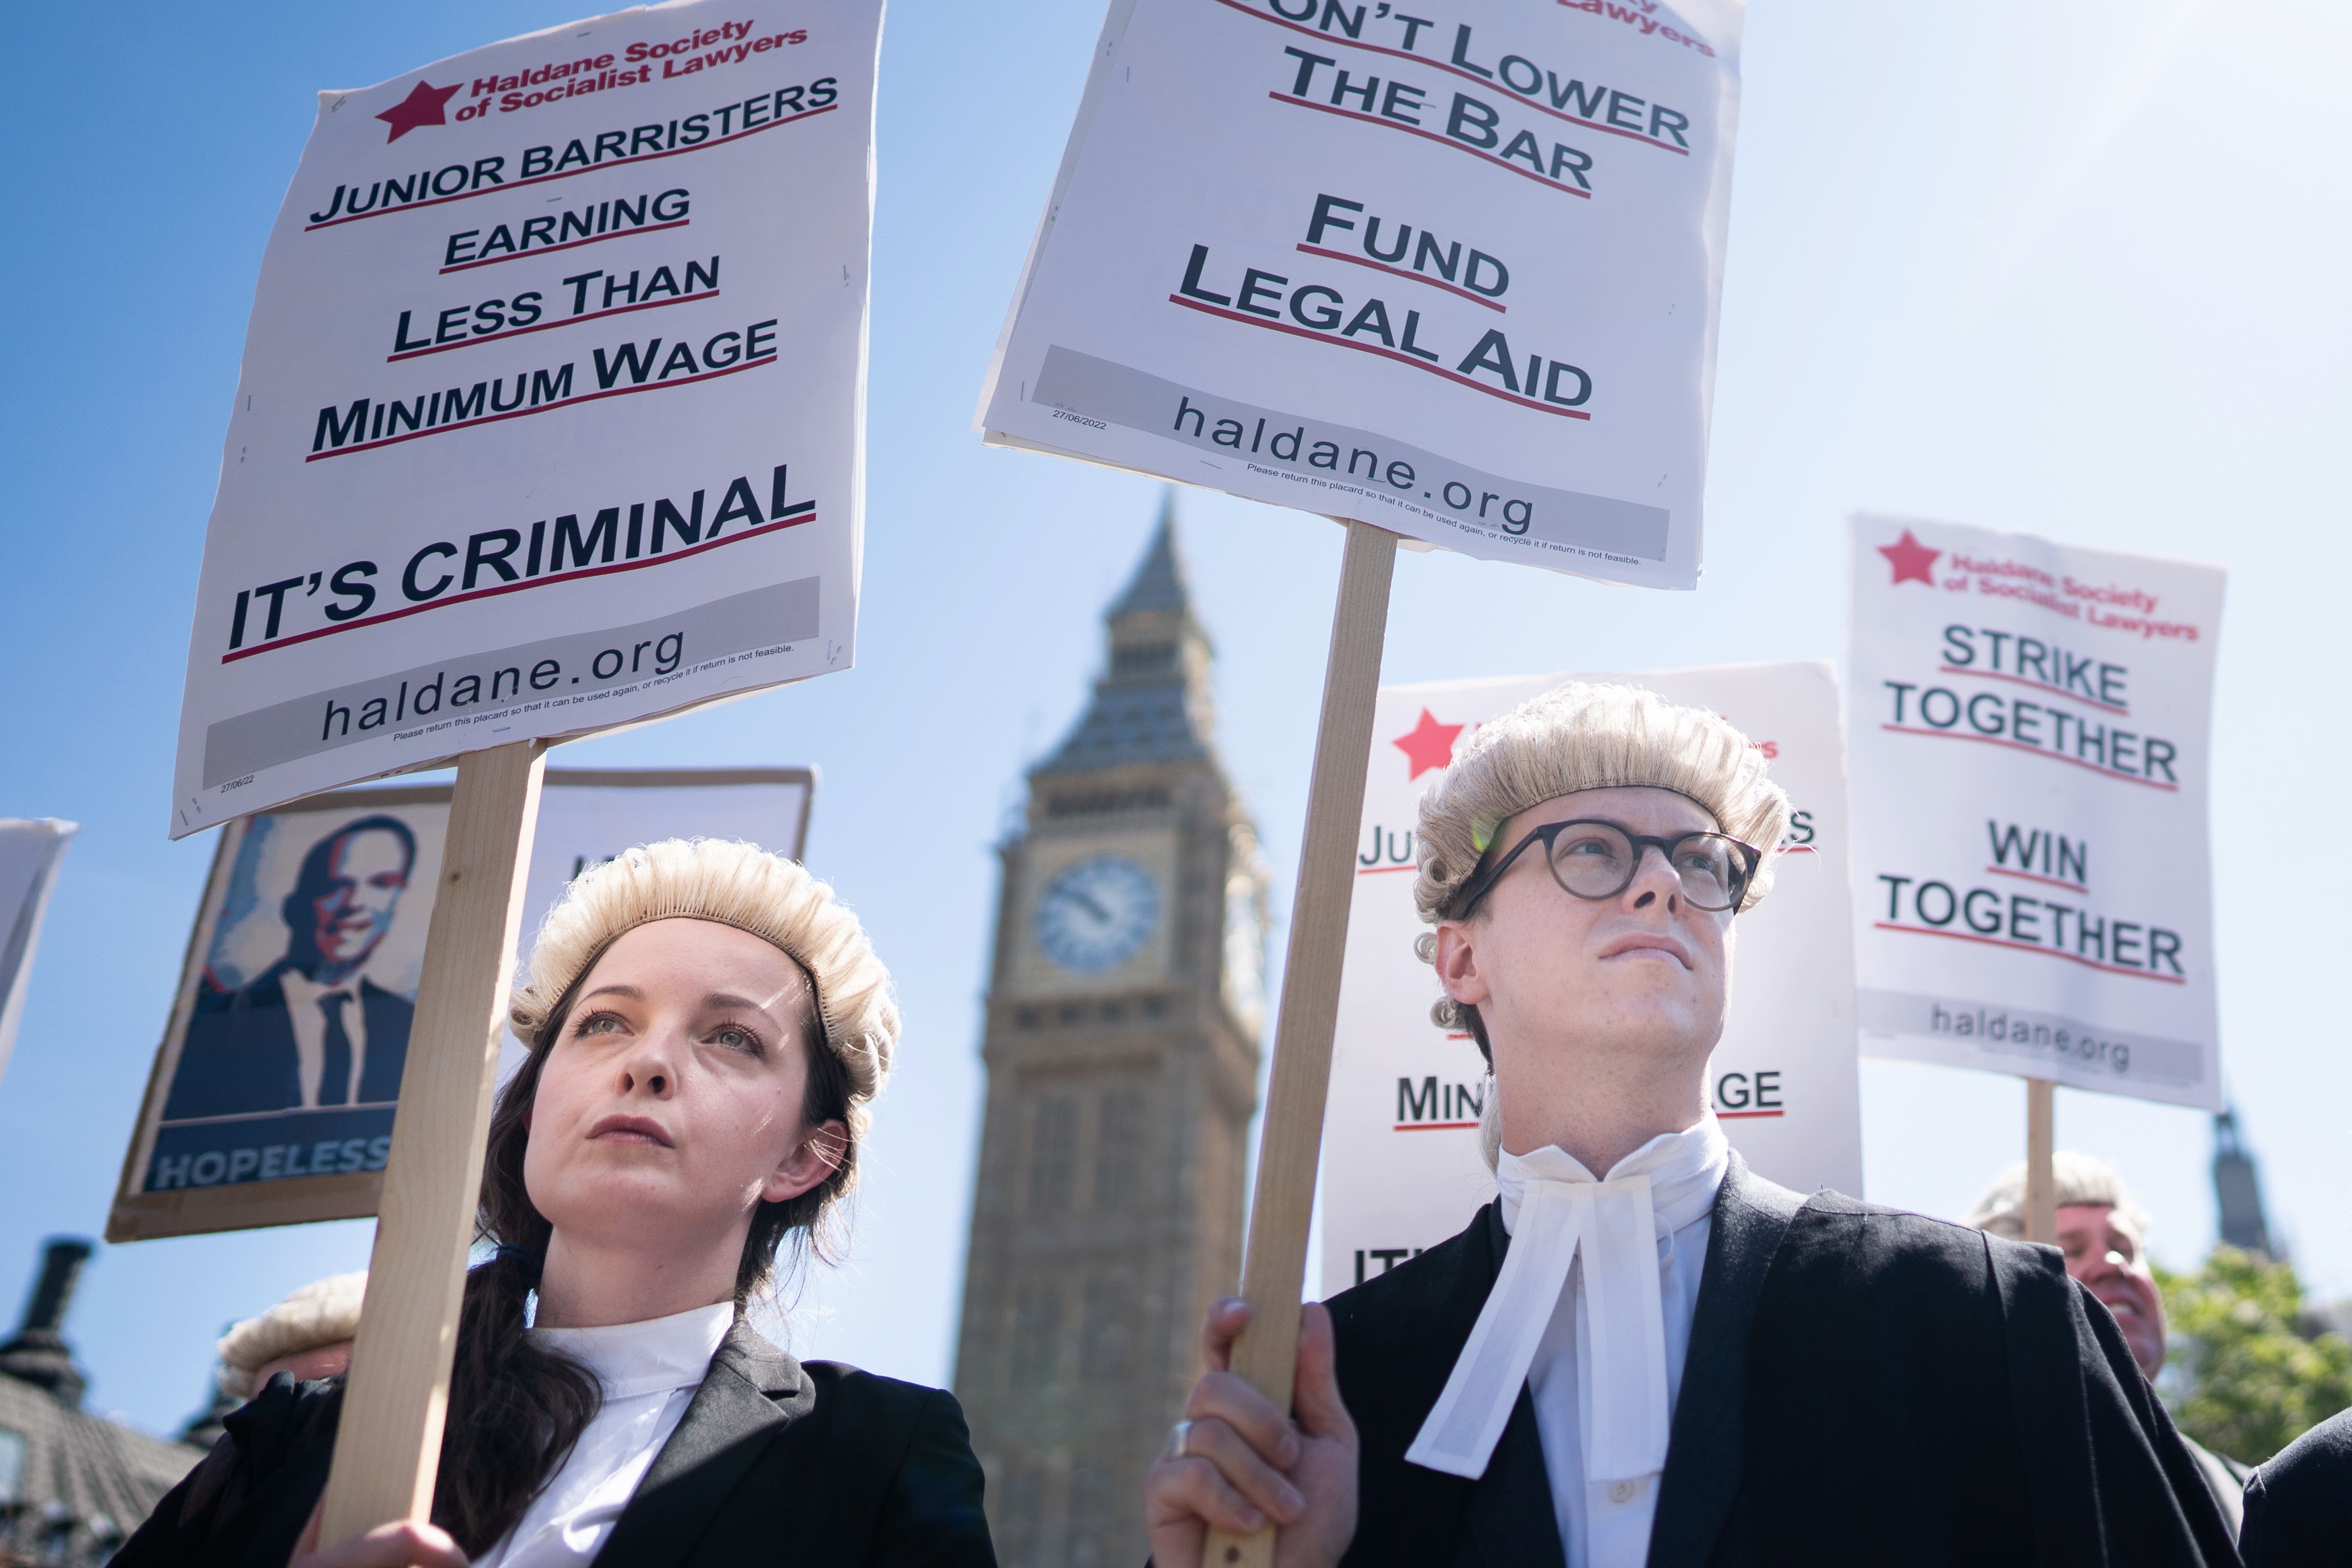 The warning comes after the courts were hit by a barristers’ strike last year